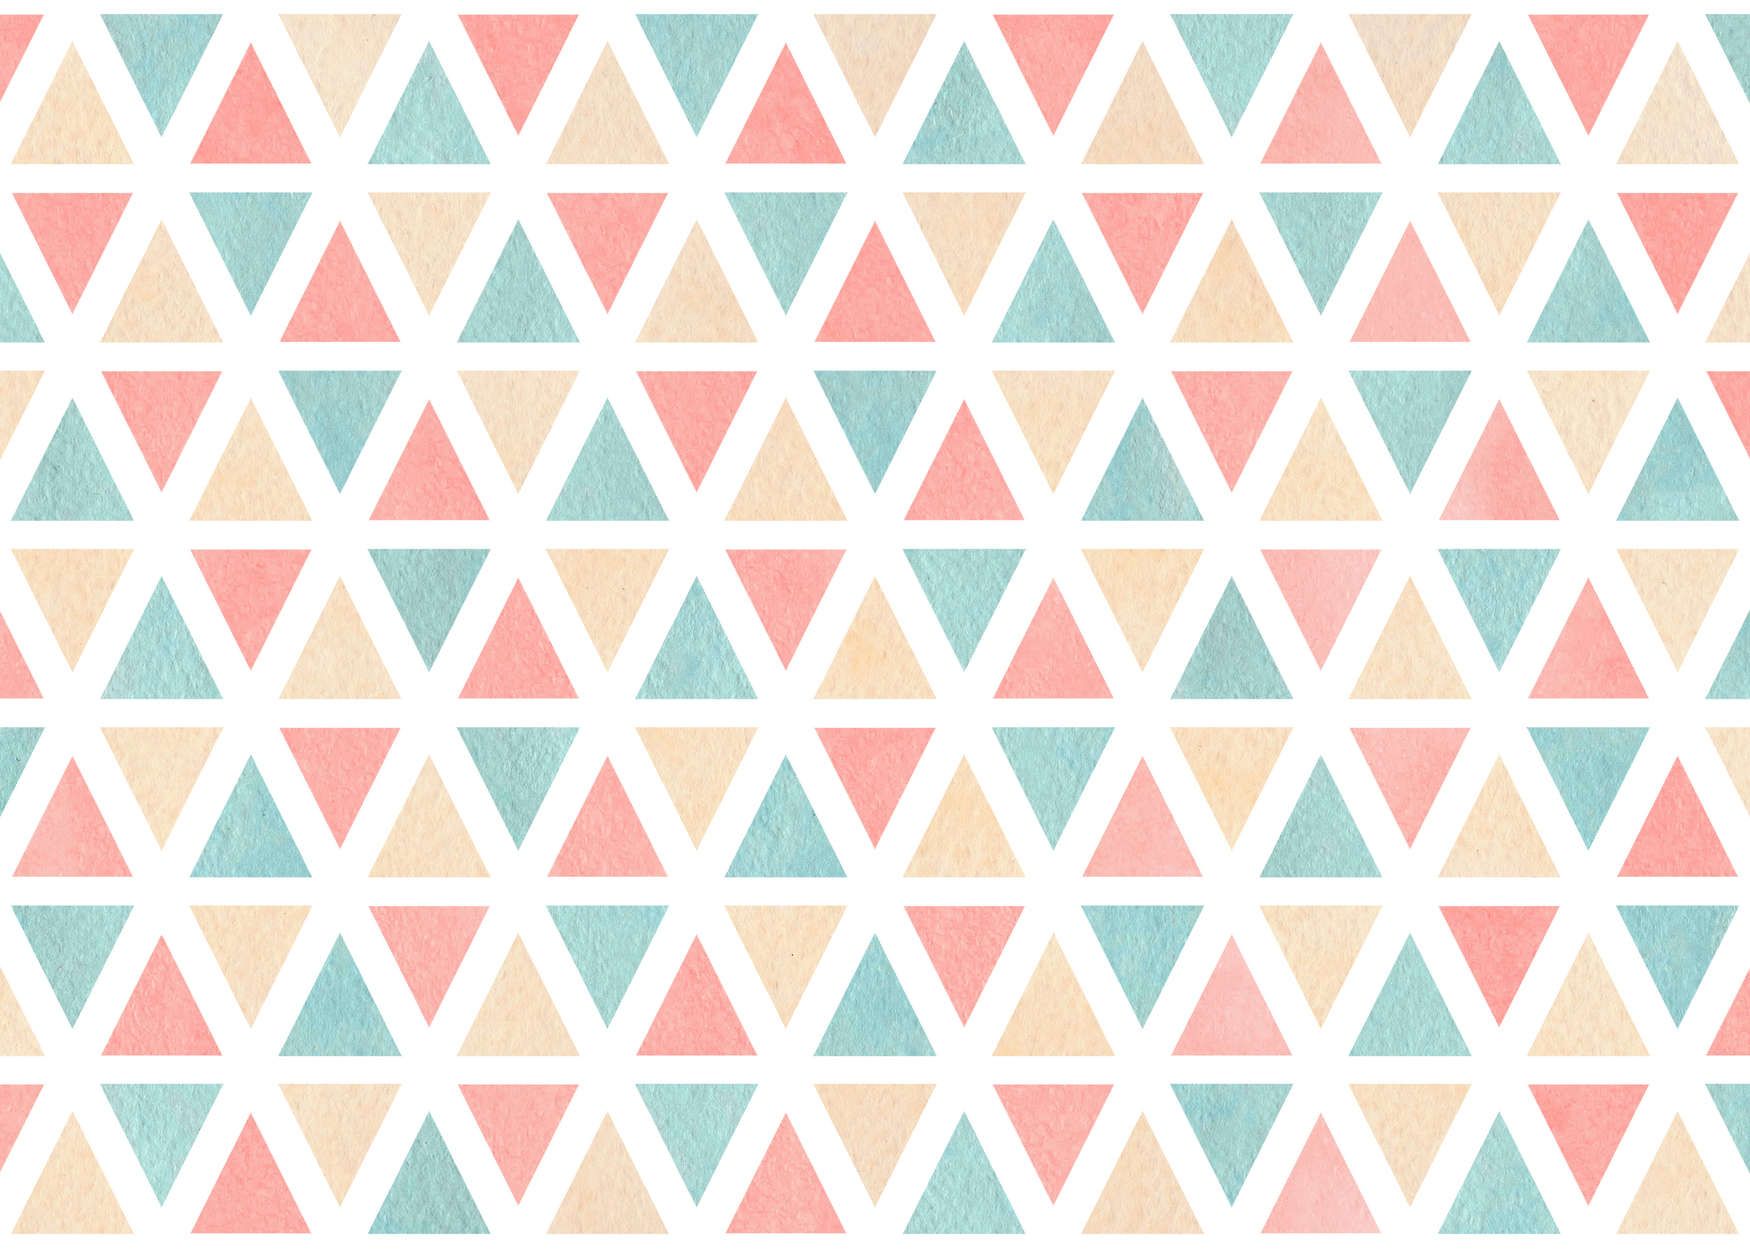             Photo wallpaper graphic pattern with colourful triangles - Smooth & matt non-woven
        